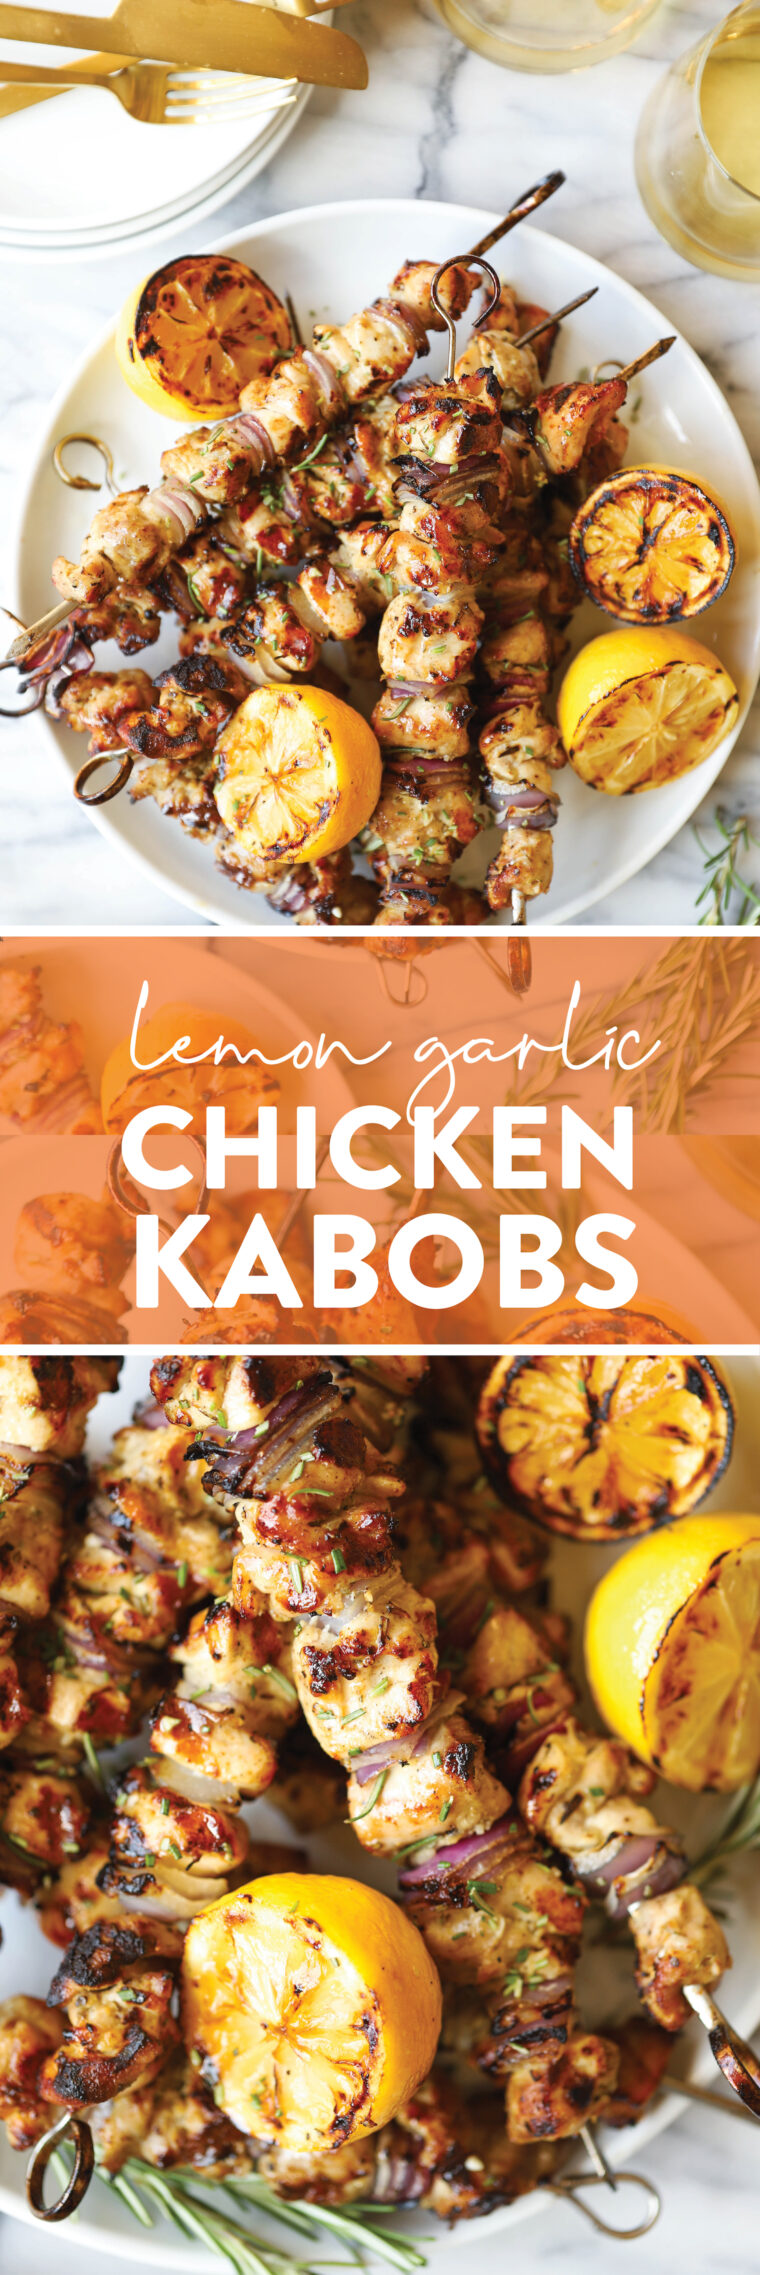 Lemon Garlic Chicken Kabobs - With the most heavenly lemony-garlicky marinade, these kabobs will be made all the time! So tender, so juicy!